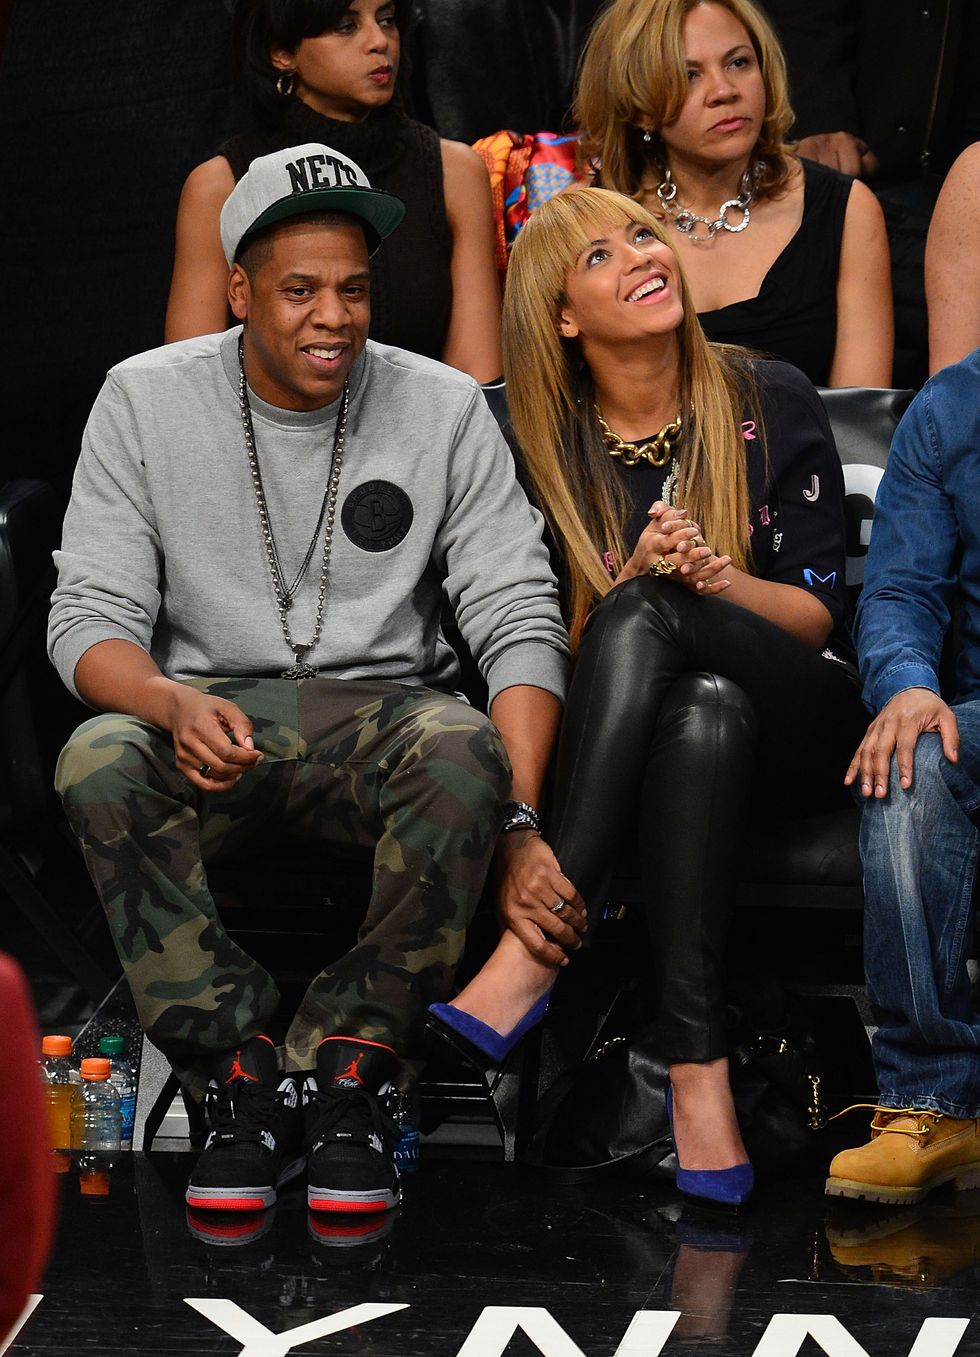 new york, ny november 26 jay z and beyonce knowles attend the new york knicks v brooklyn nets game at barclays center on november 26, 2012 in the brooklyn borough of new york city photo by james devaneyfilmmagic